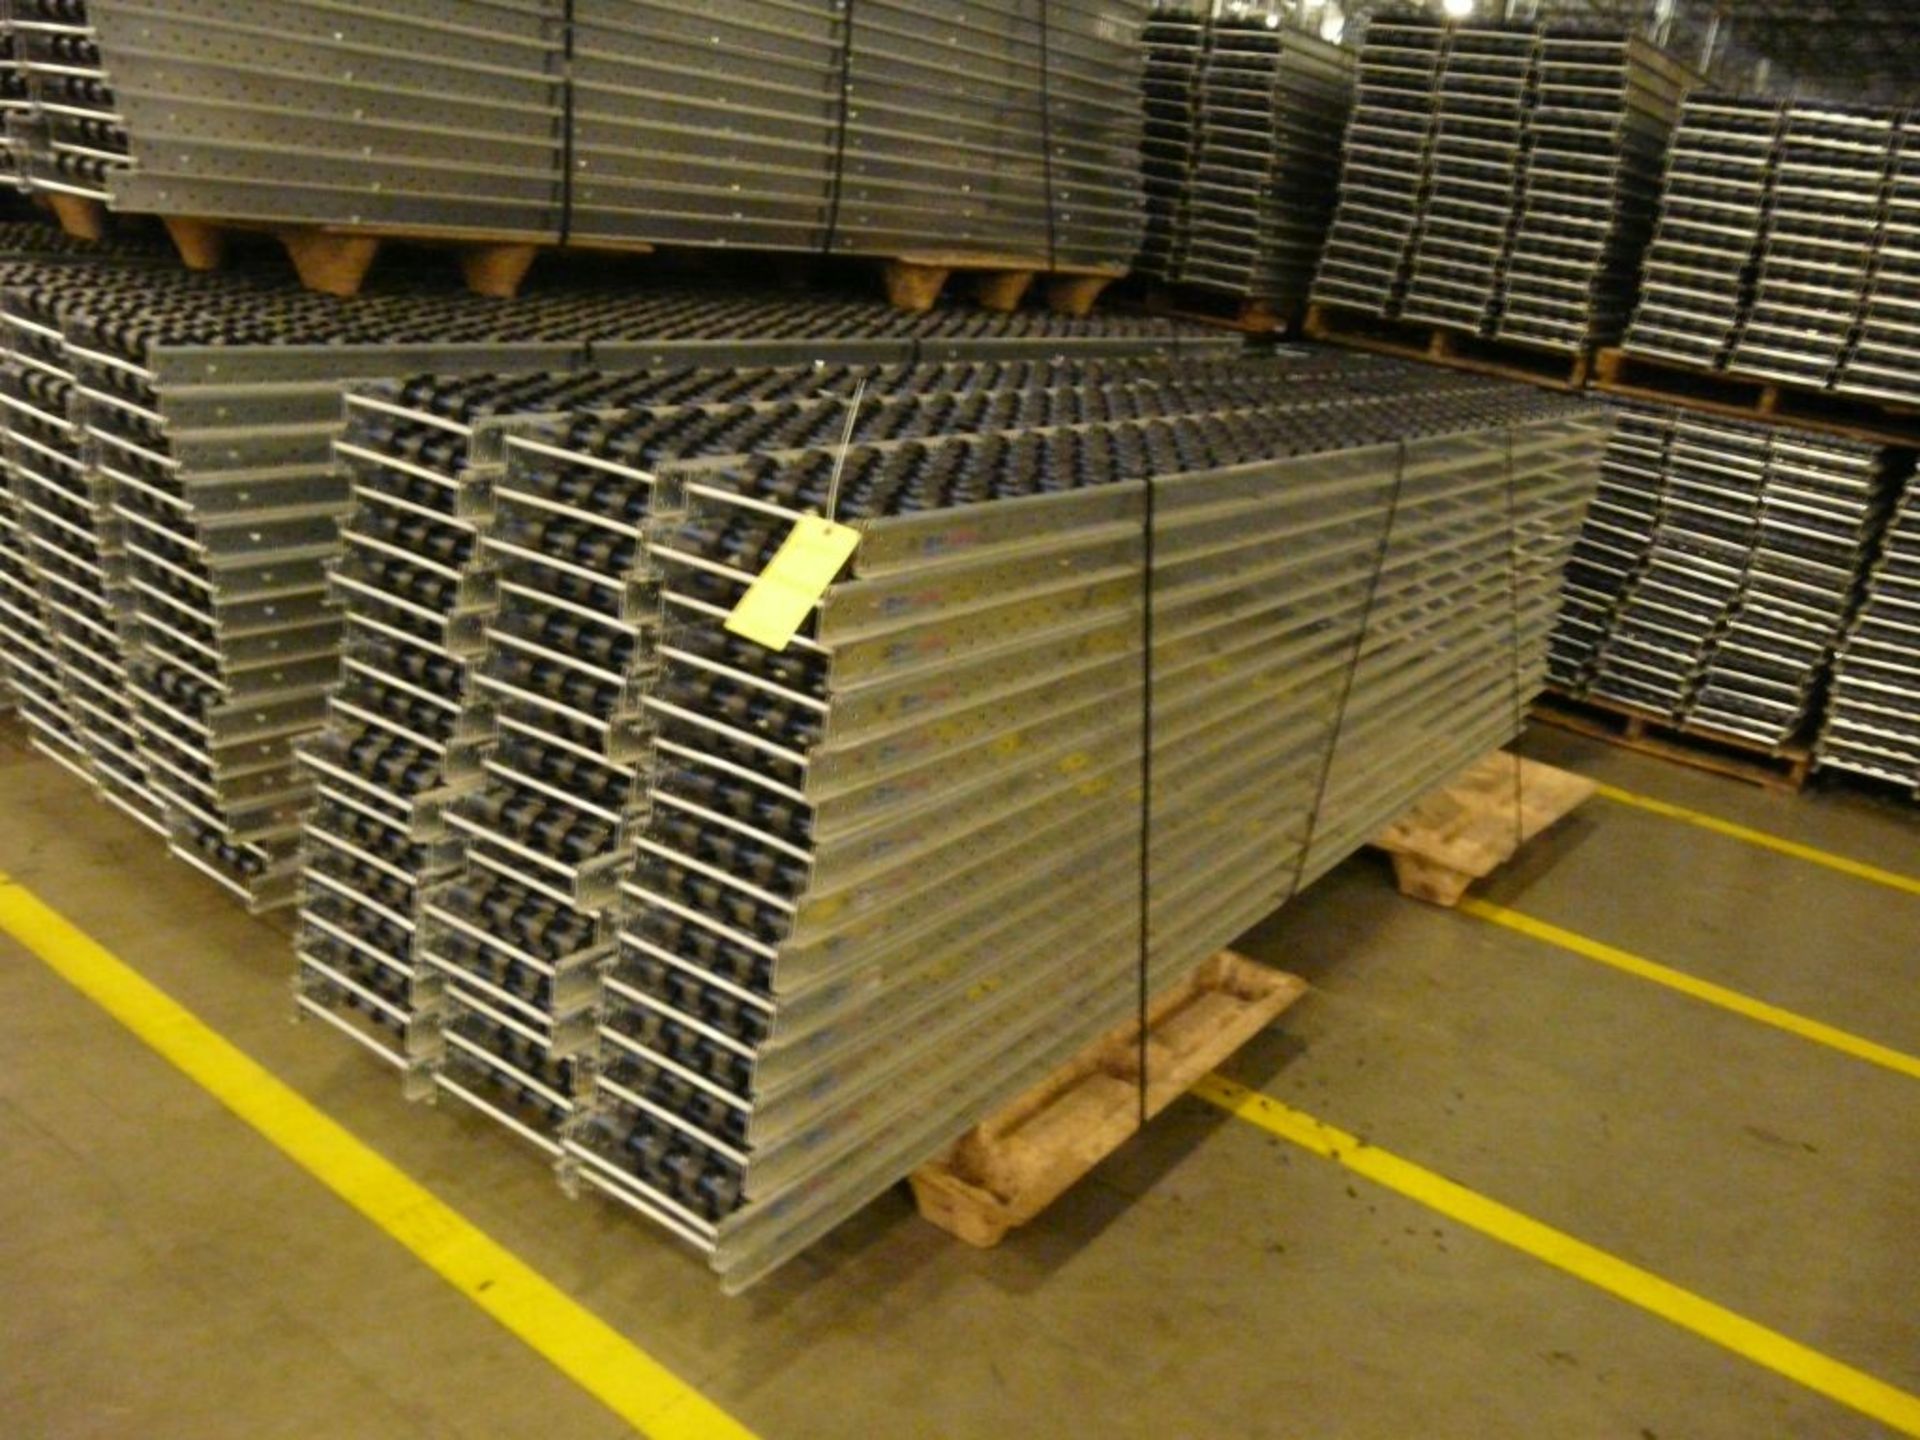 Lot of (90) SpanTrack Wheelbed Carton Flow Conveyors - 11.5'L x 11"W; Tag: 223593 - $30 Lot